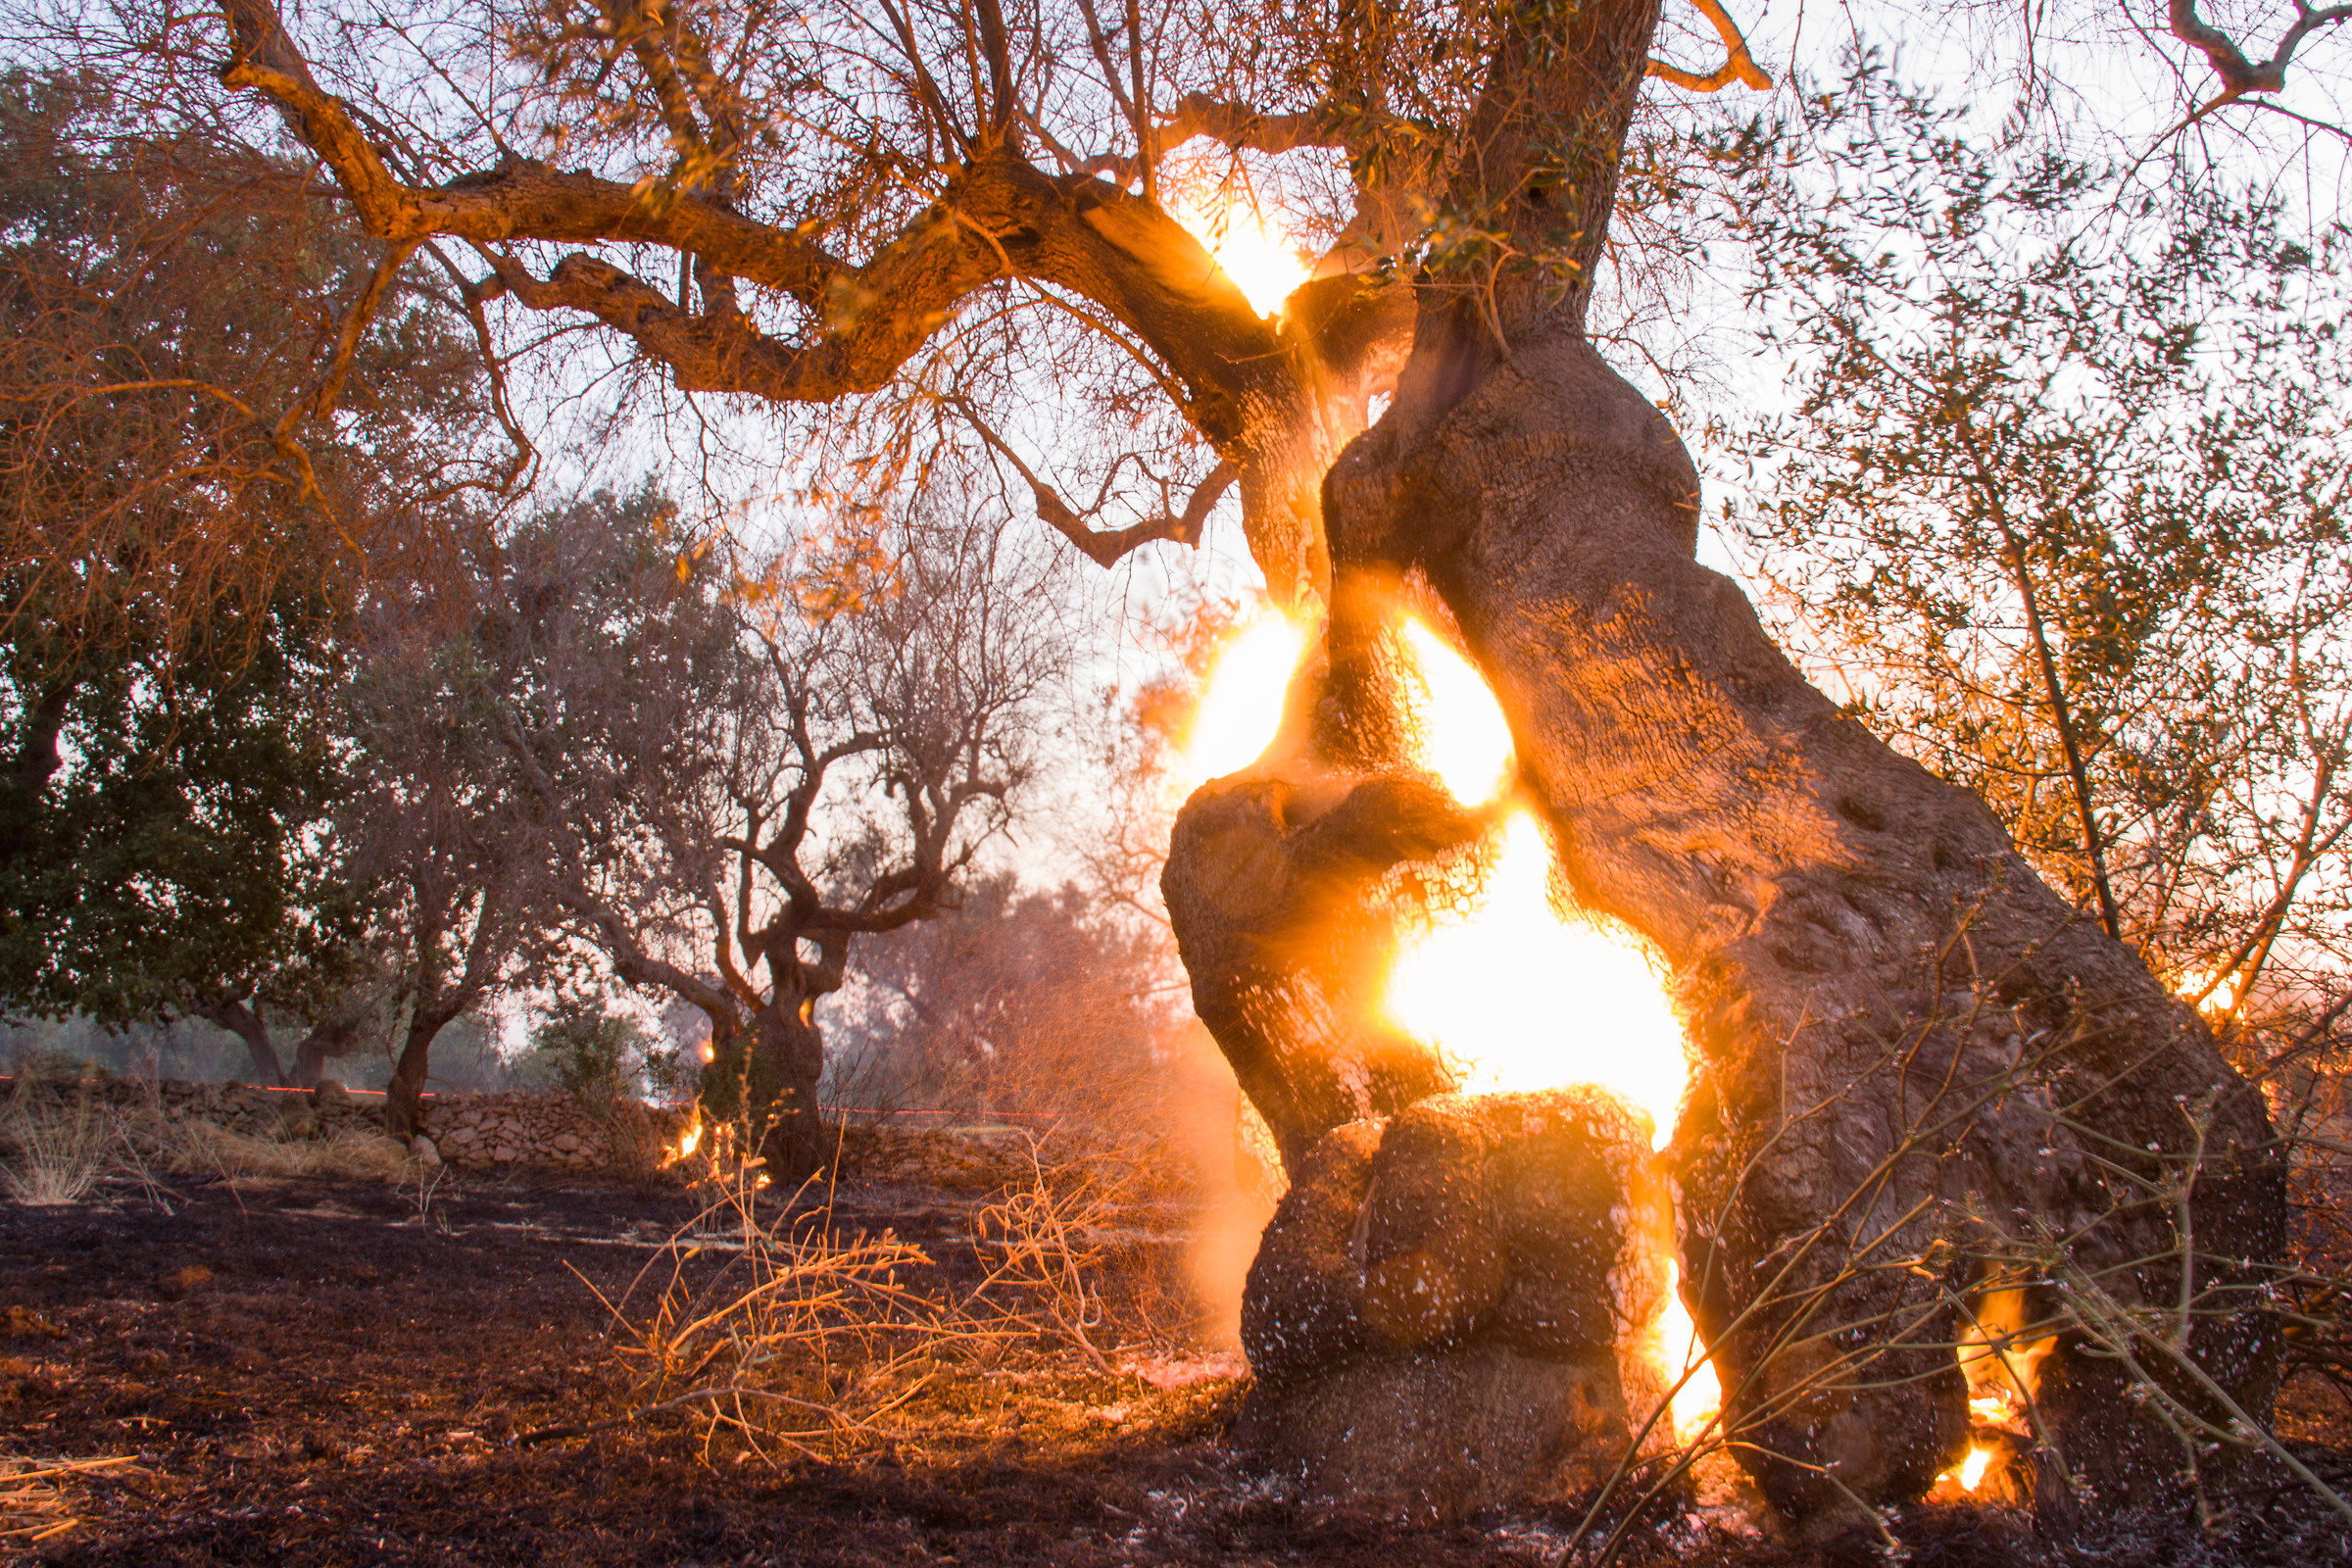 Olive tree in flames...